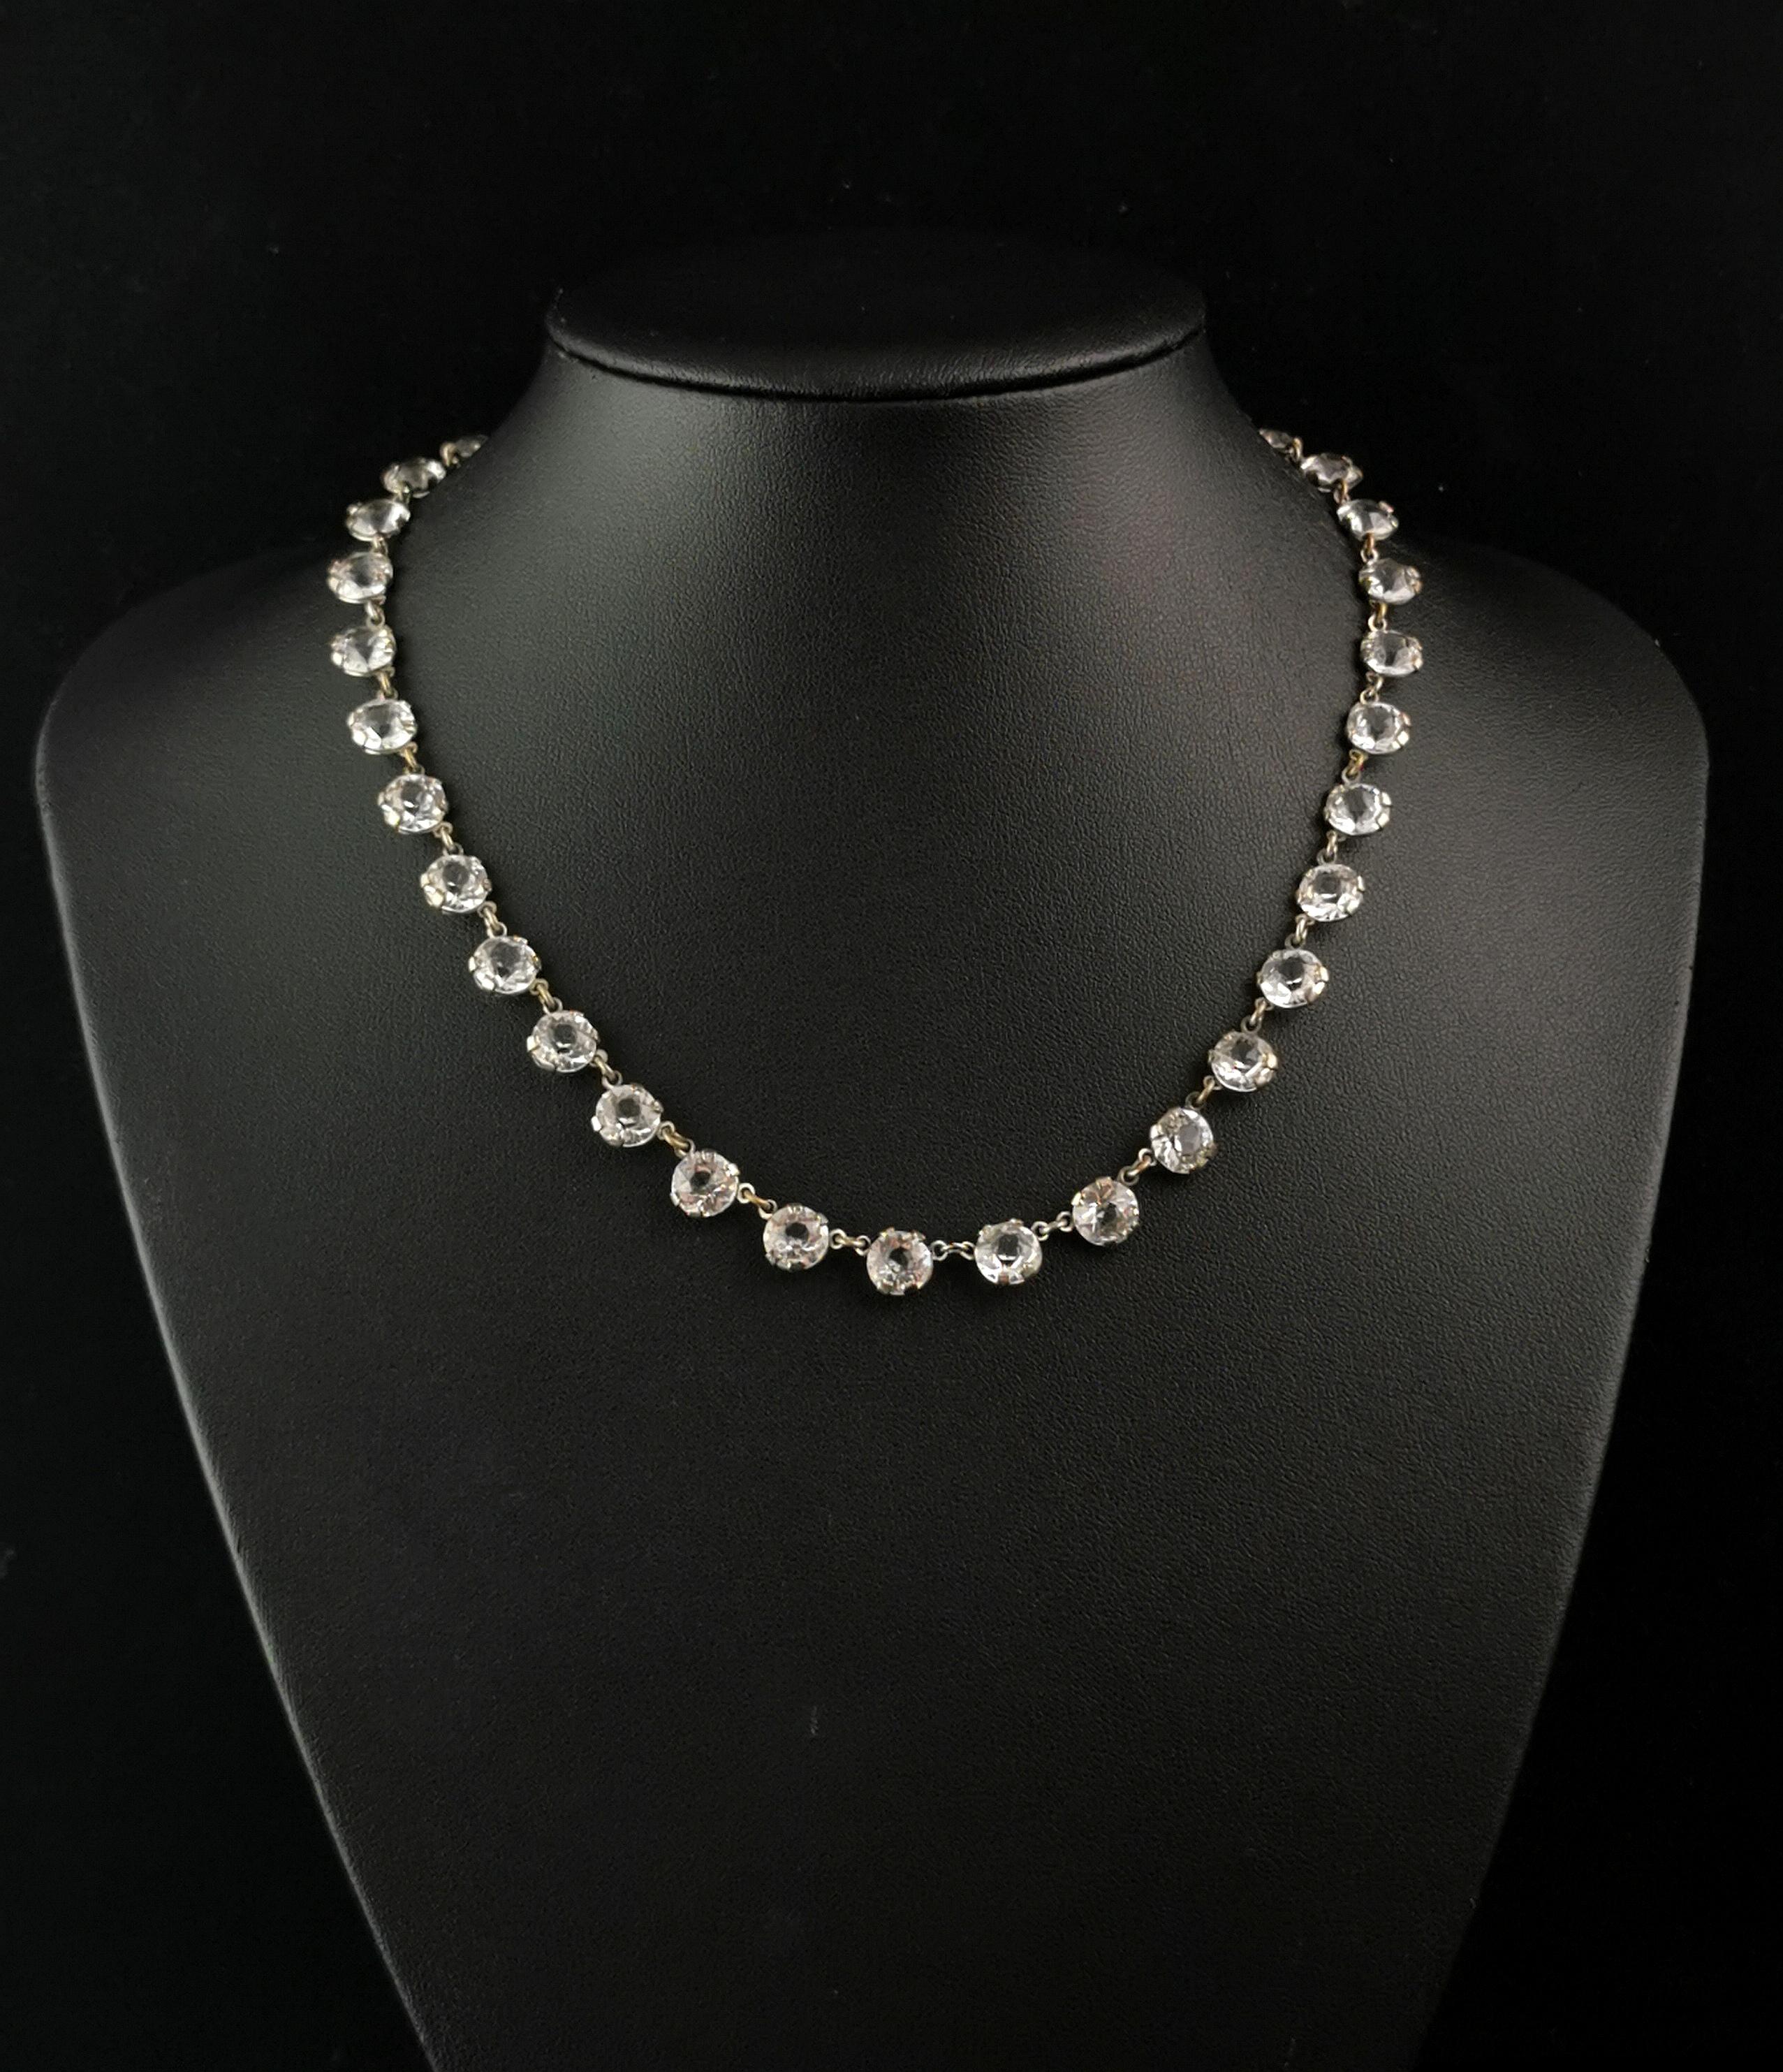 A gorgeous vintage Art Deco paste riviere necklace.

This necklace is crafted in cool toned silver plate and brings a timeless elegance to your wardrobe.

Crafted in the 1930s, it features round cut sparkling paste stones with all the shimmer of